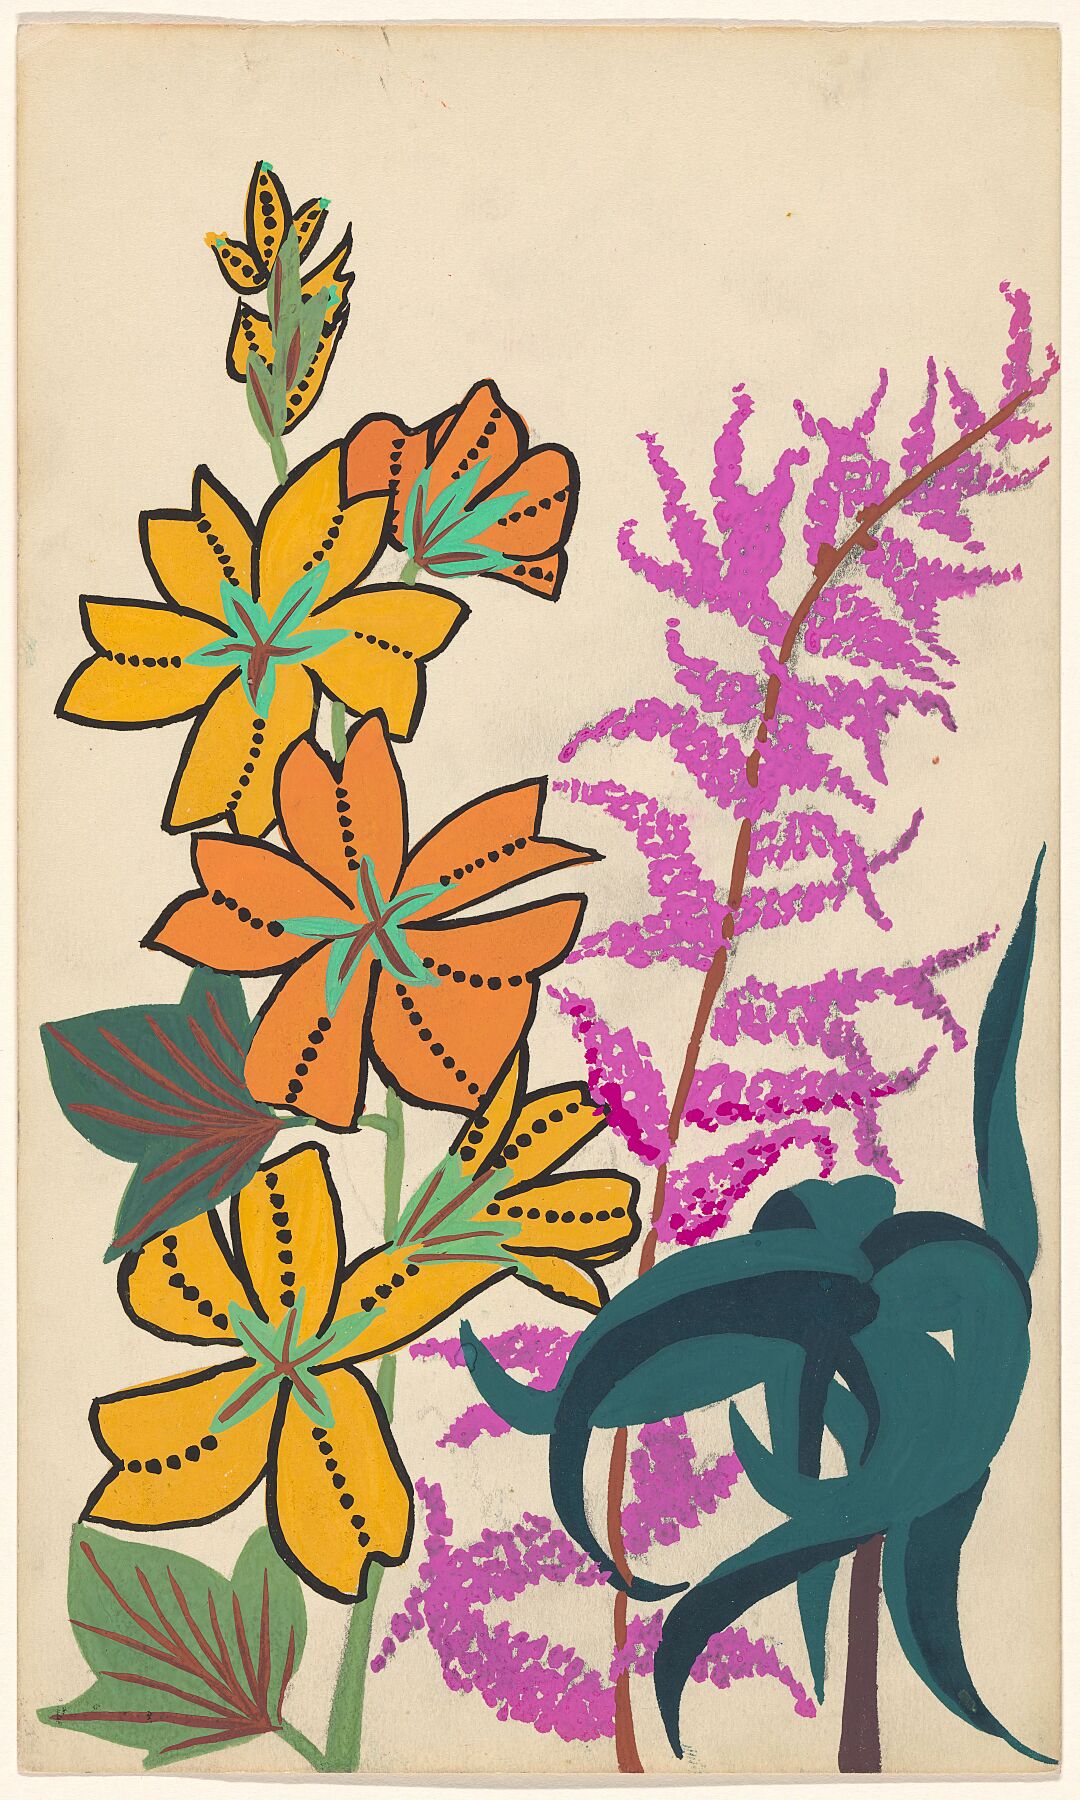 Design for embroidery of flower sprays and leaves, Atelier Martine, c. 1914